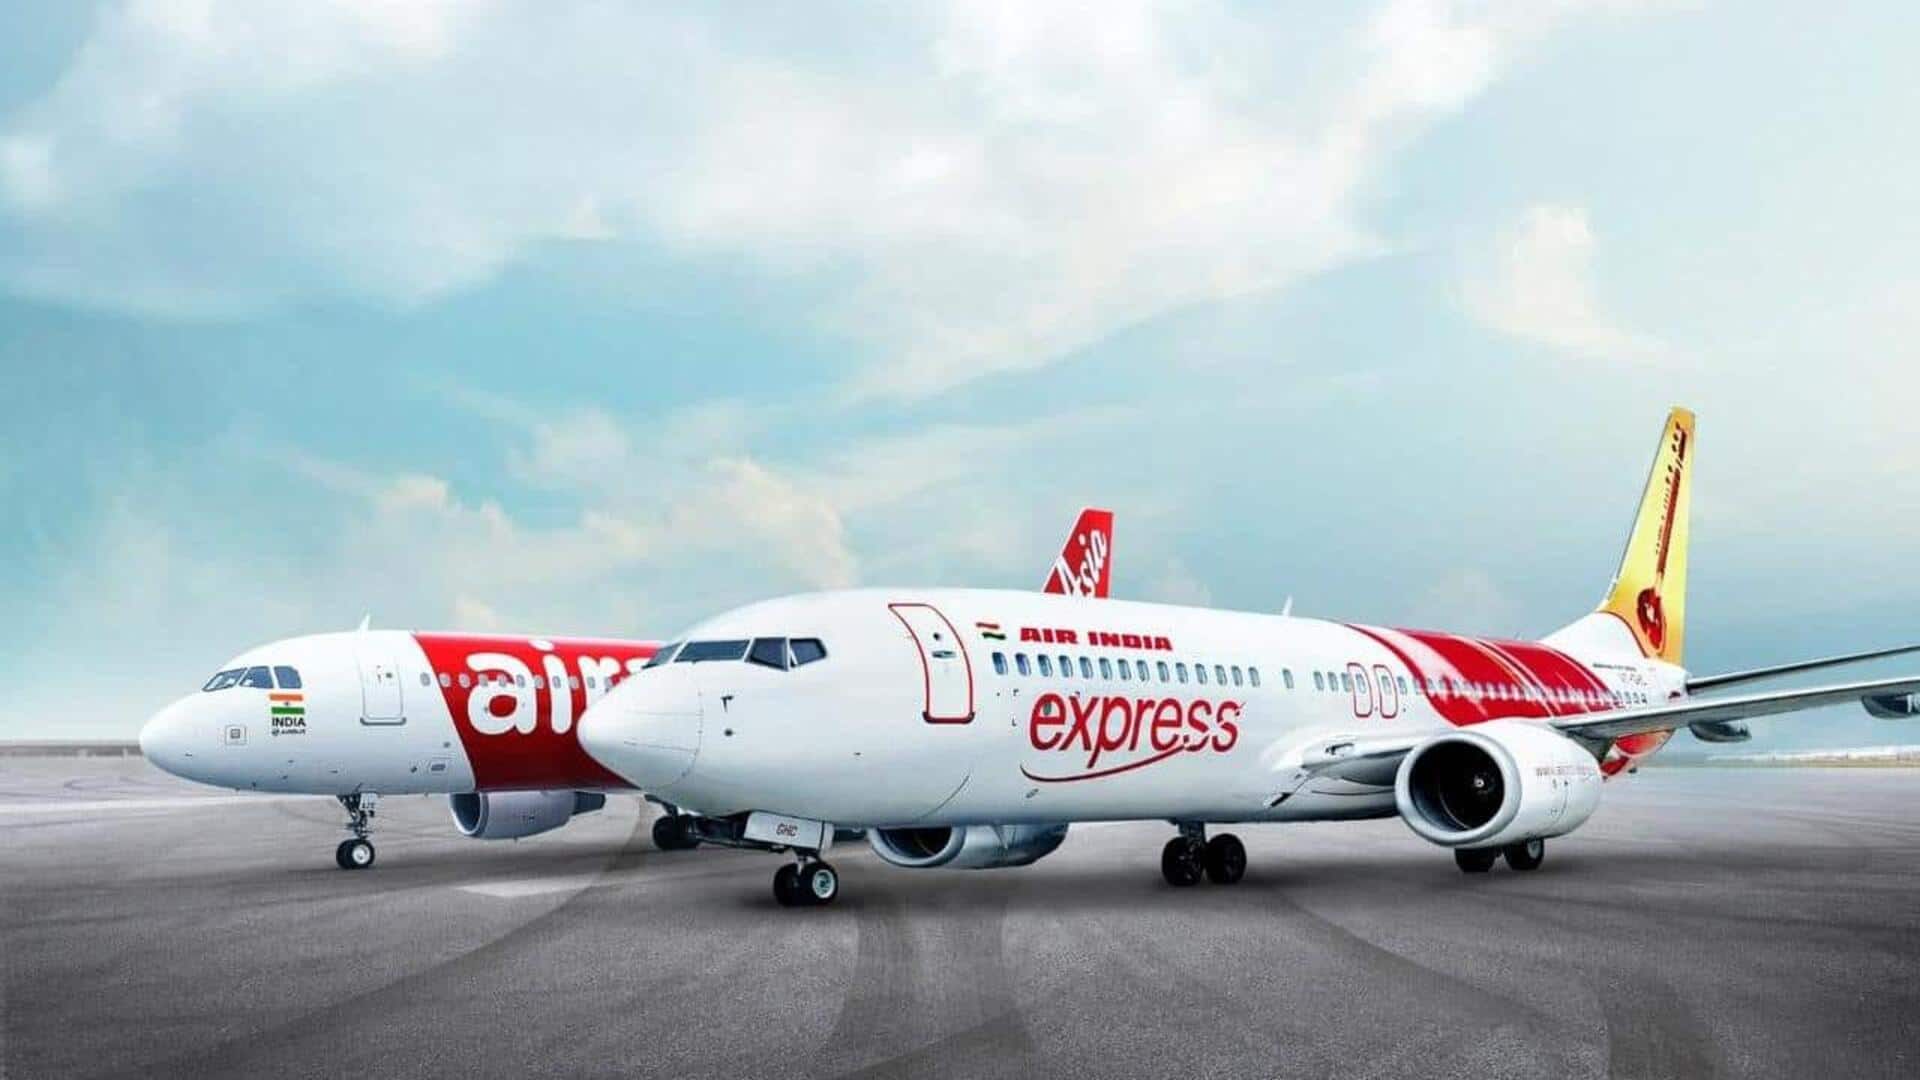 Air India Express accused of unfair labor practices by union